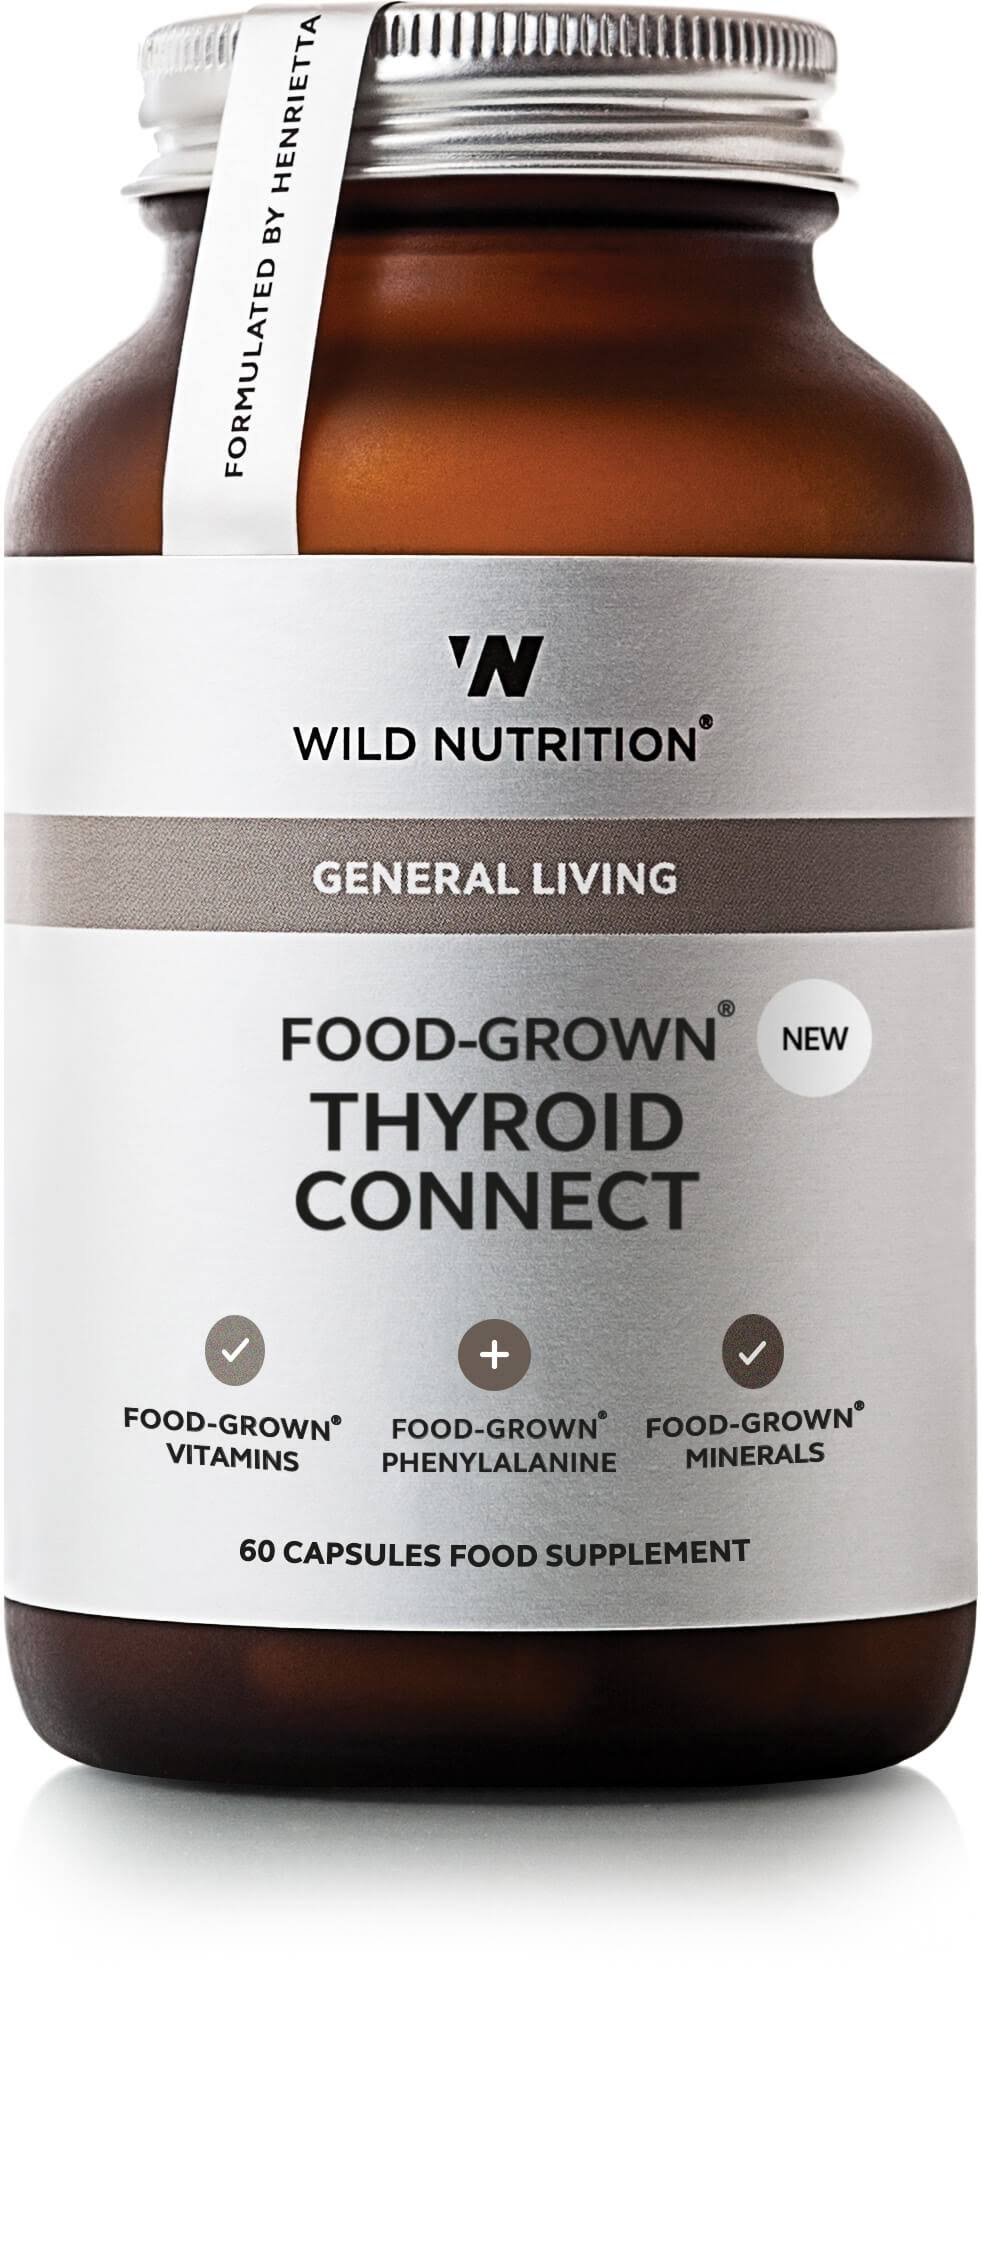 Wild Nutrition Food-Grown Thyroid Connect (60 Capsules)